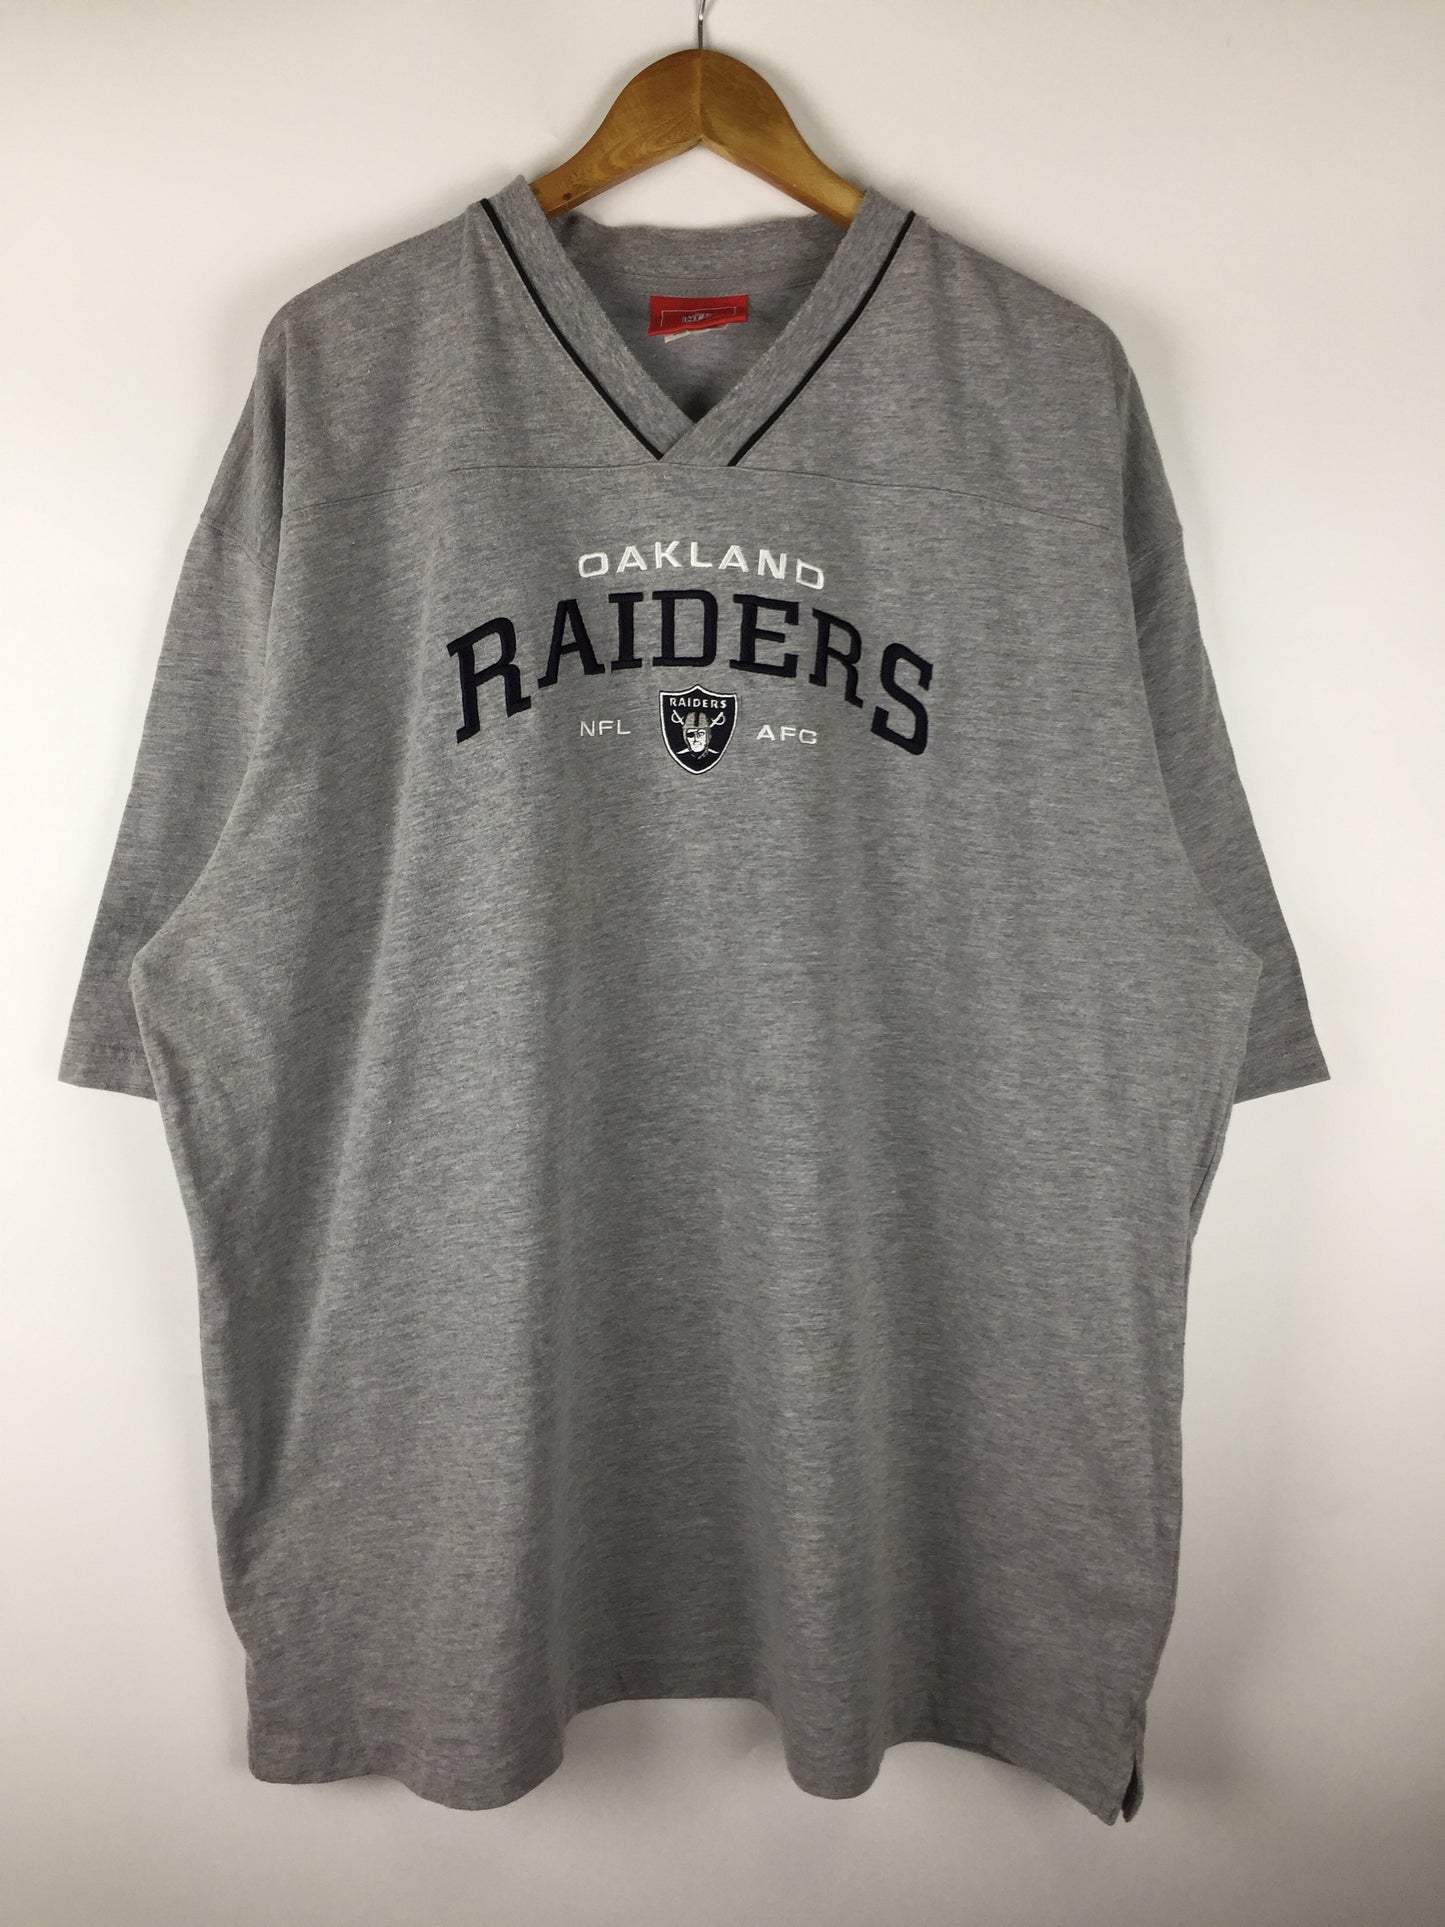 Vintage Oakland Raiders 00s NFL embroidered T-shirt